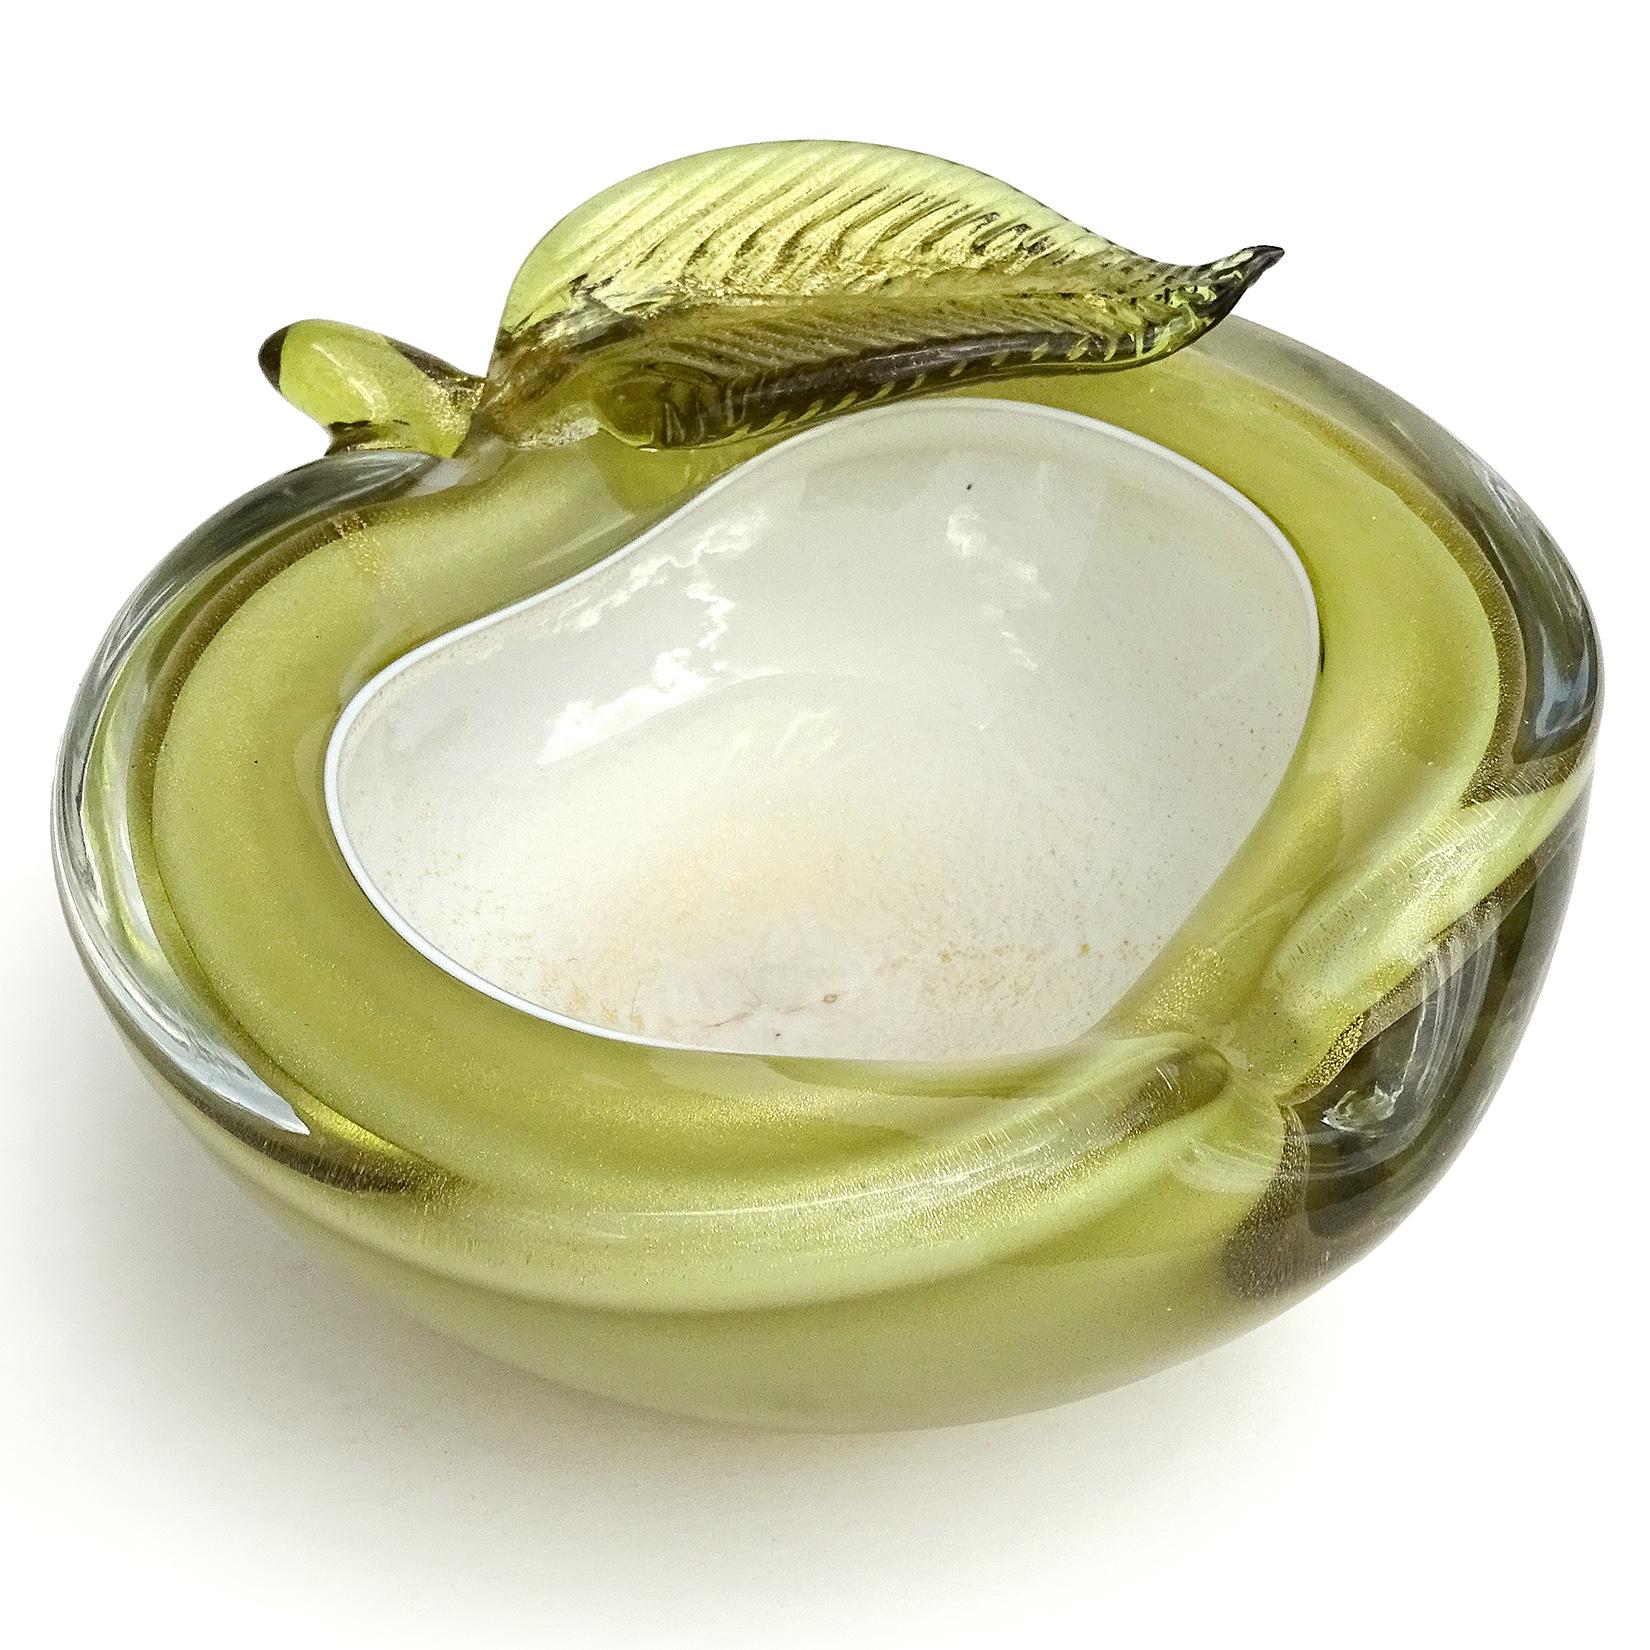 Beautiful vintage Murano hand blown olive green over white and gold flecks Italian art glass apple shaped bowl. Documented to Master glass artist and designer Alfredo Barbini, circa 1950-1960. Published in his vintage catalogs. The bowl is profusely